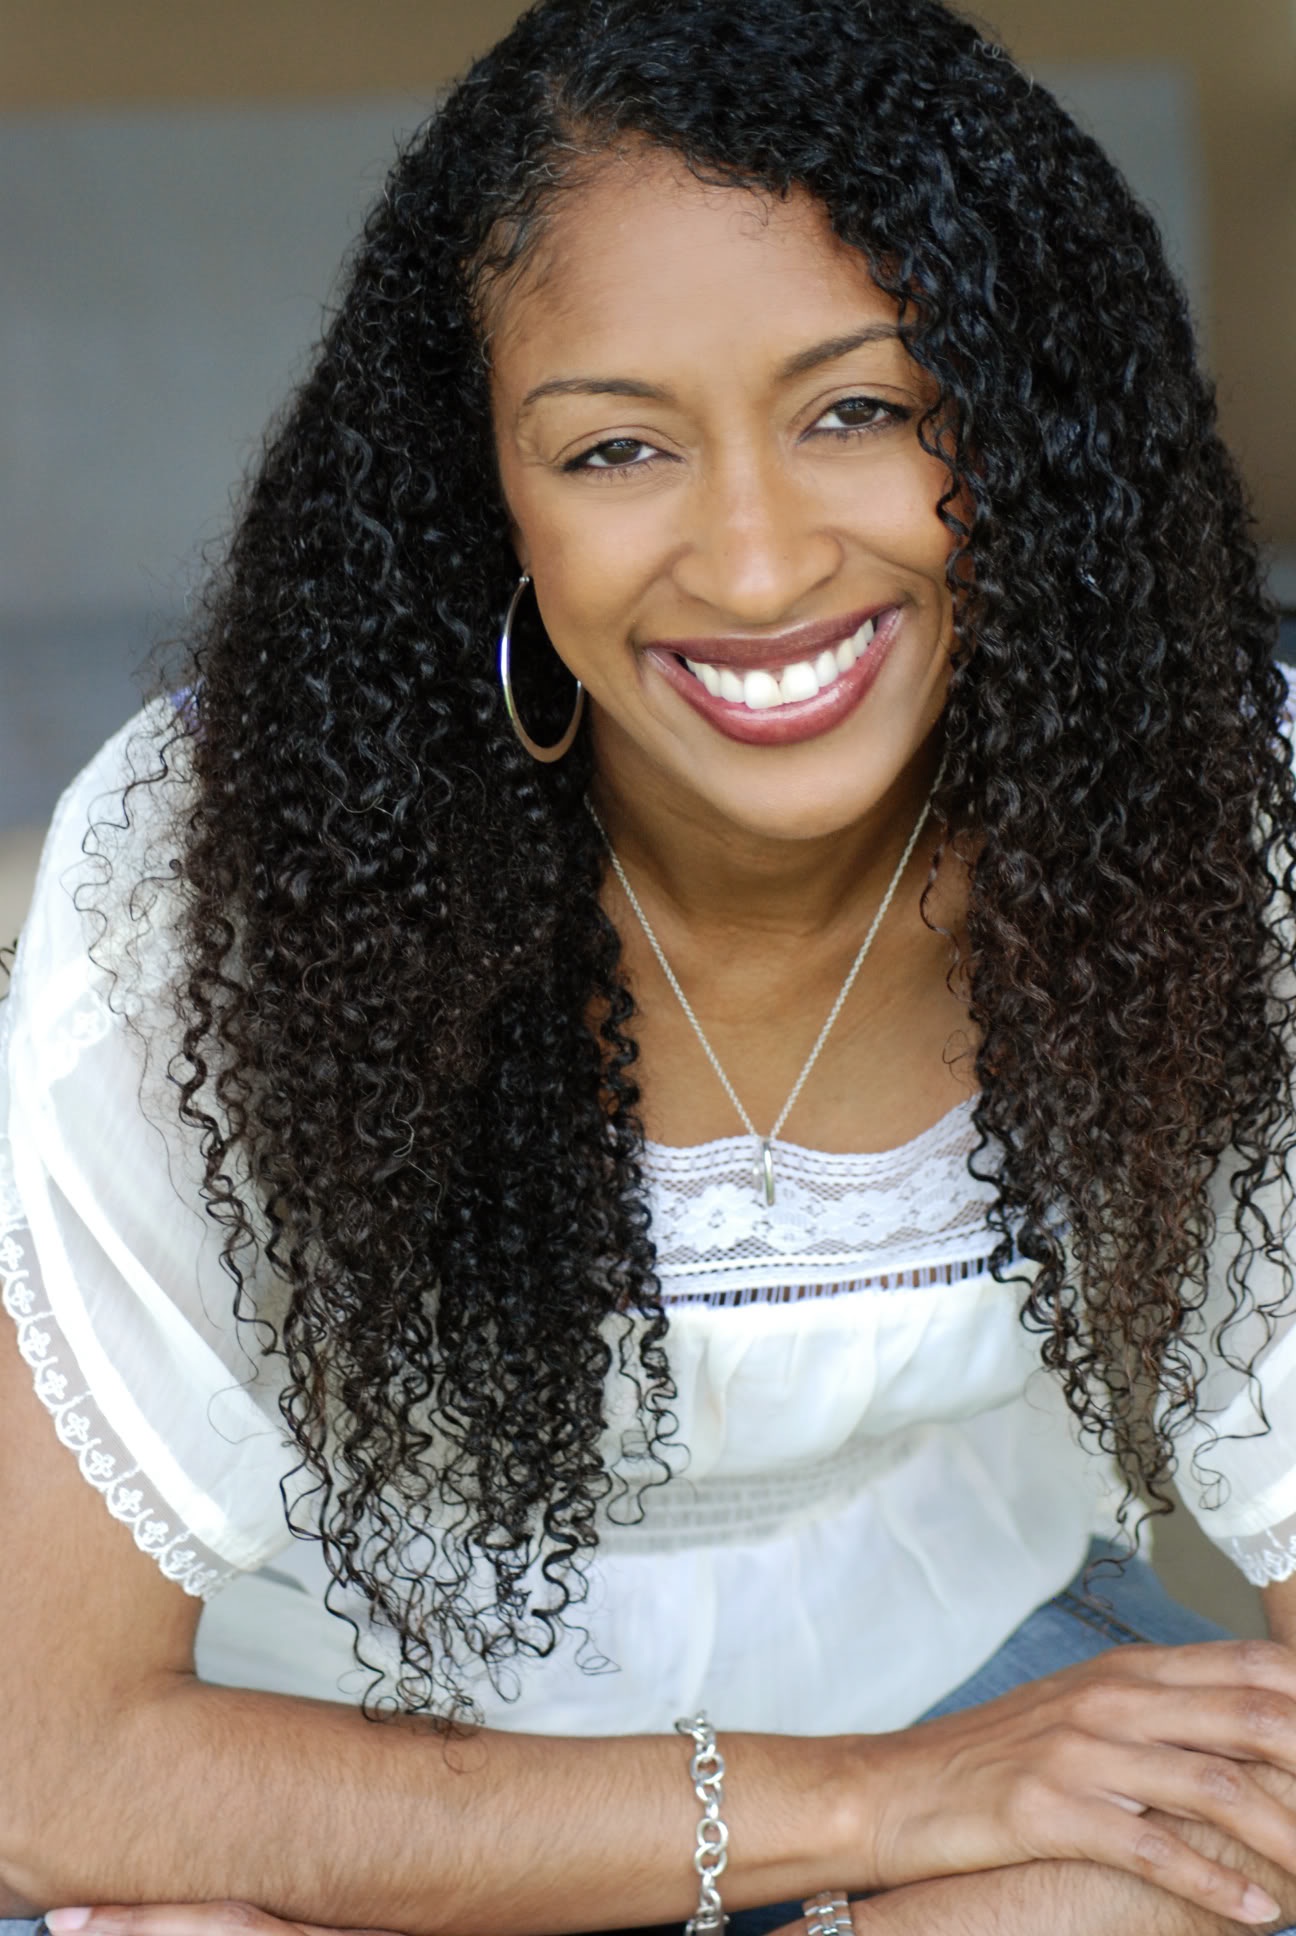 My interview with Owner of Kinky-Curly, Shelley Davis. - shelleydavisbio